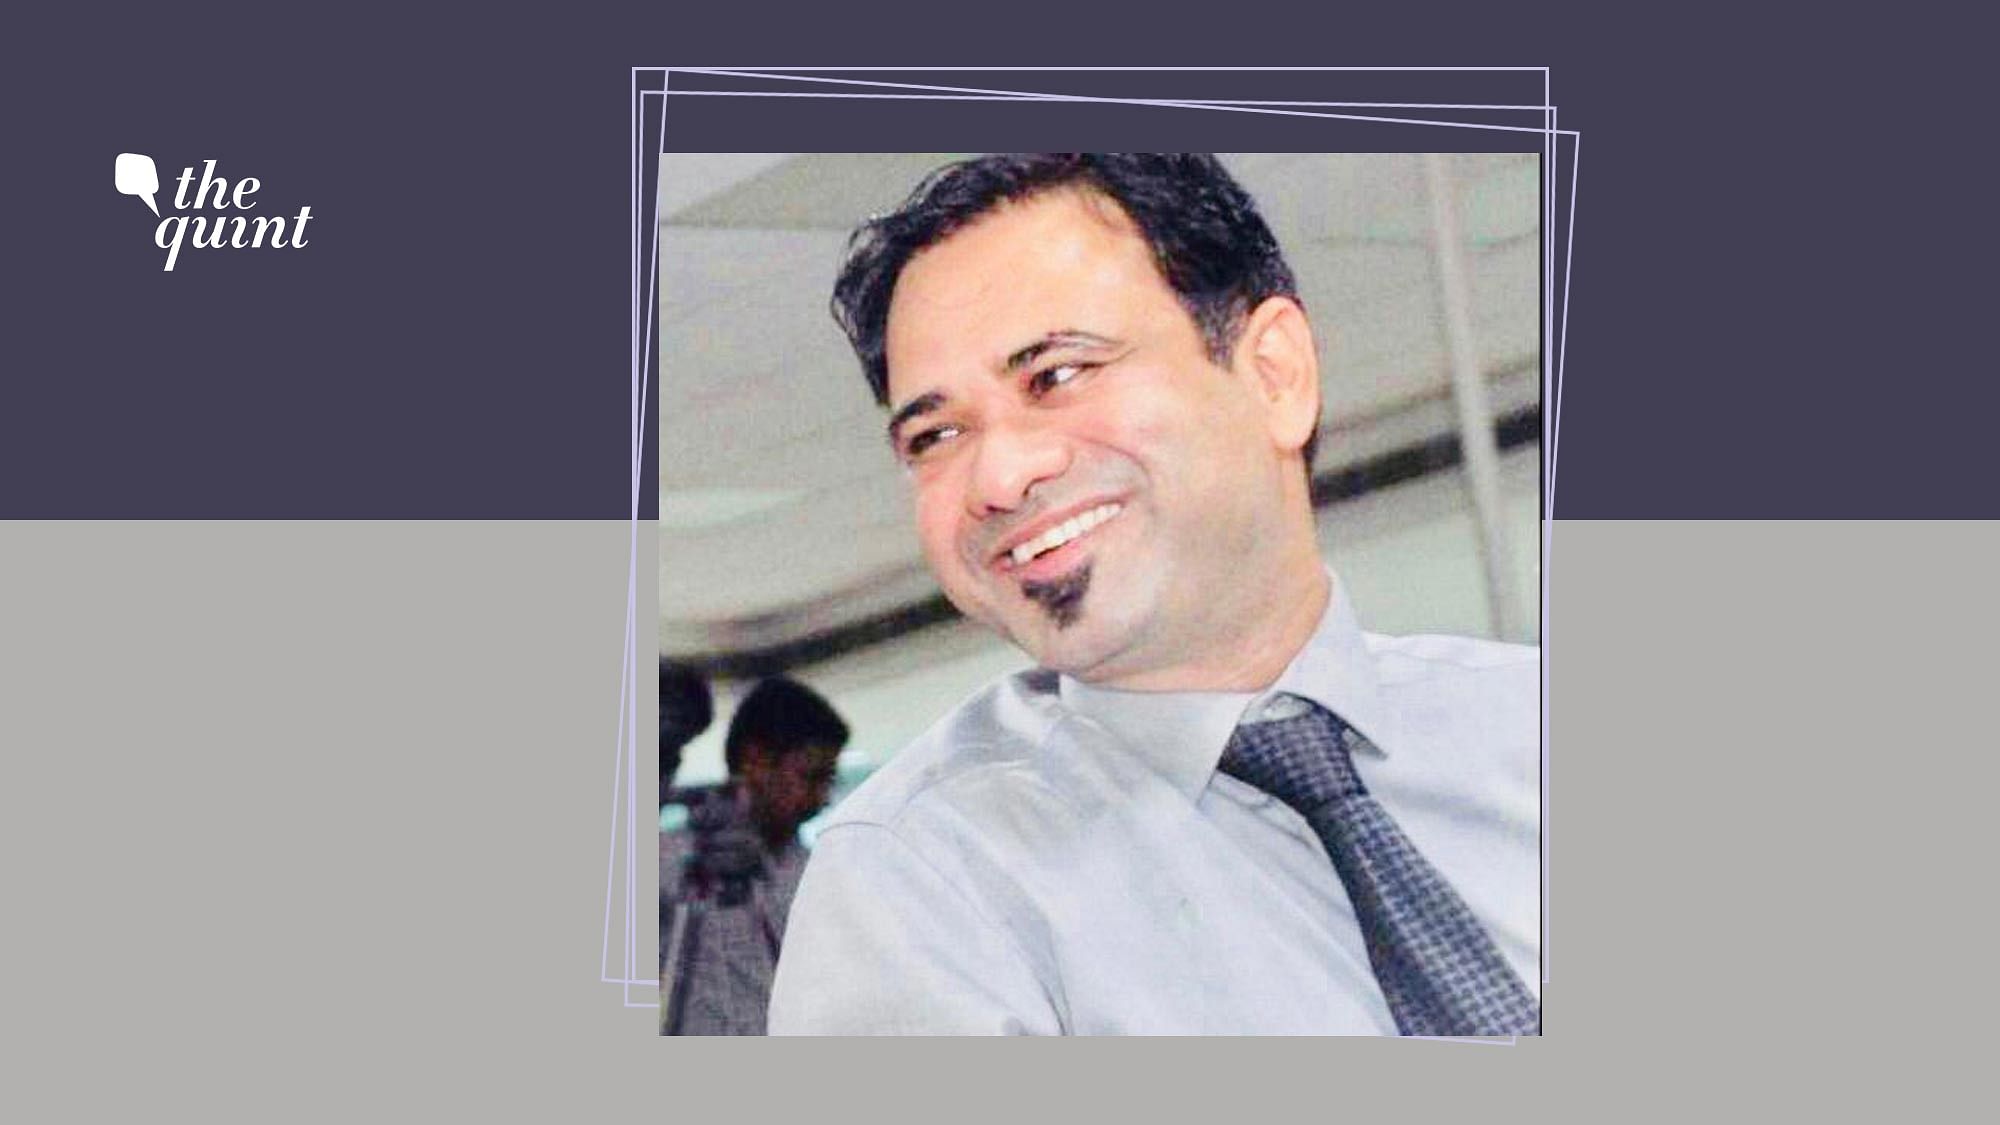 Allahabad High Court had, on 1 September, cited lack of evidence against Dr Kafeel Khan, and dropped the NSA charges against him.